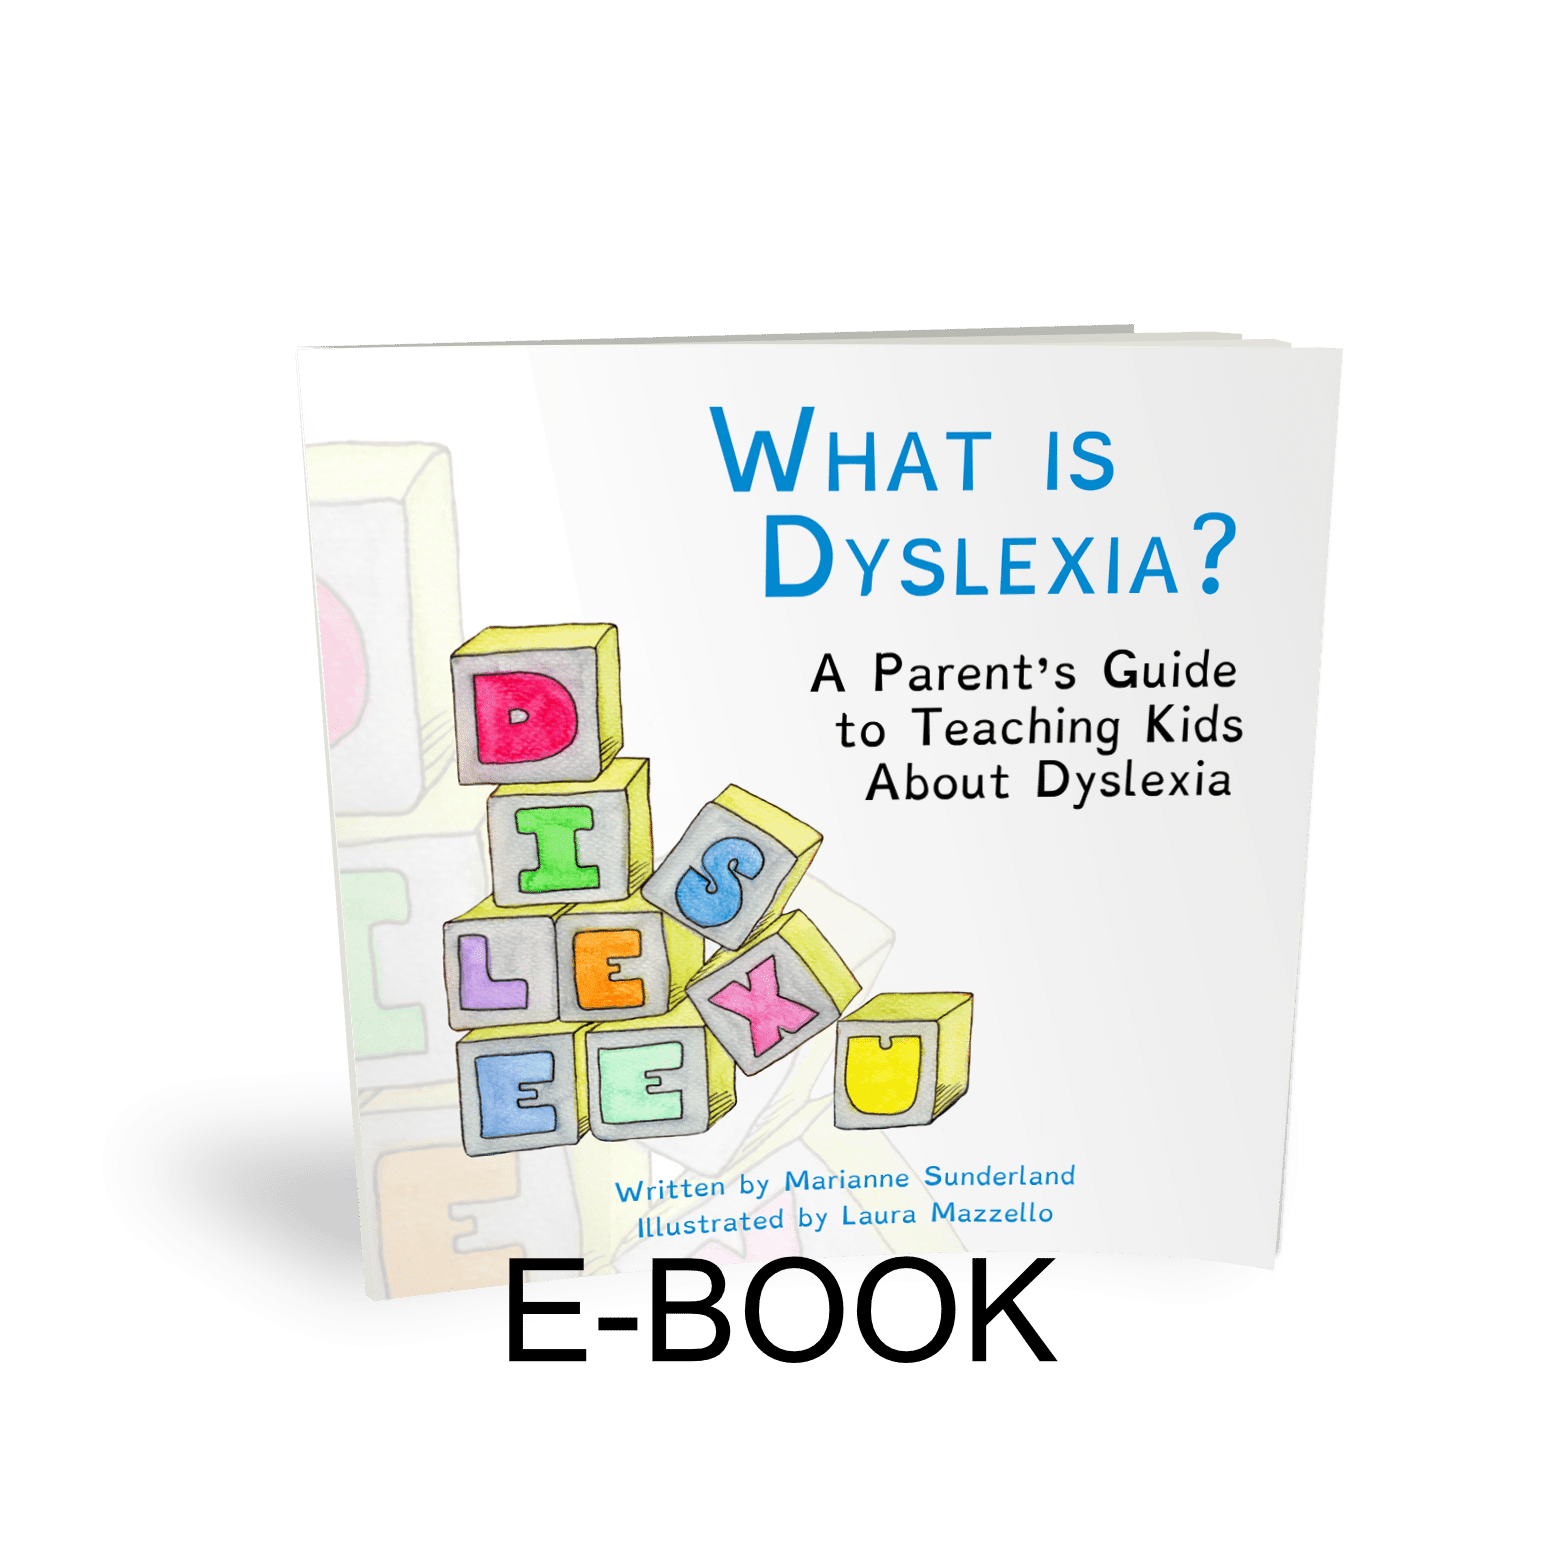 e-book-what-is-dyslexia-a-parent-s-guide-to-teaching-kids-about-dyslexia-homeschooling-with